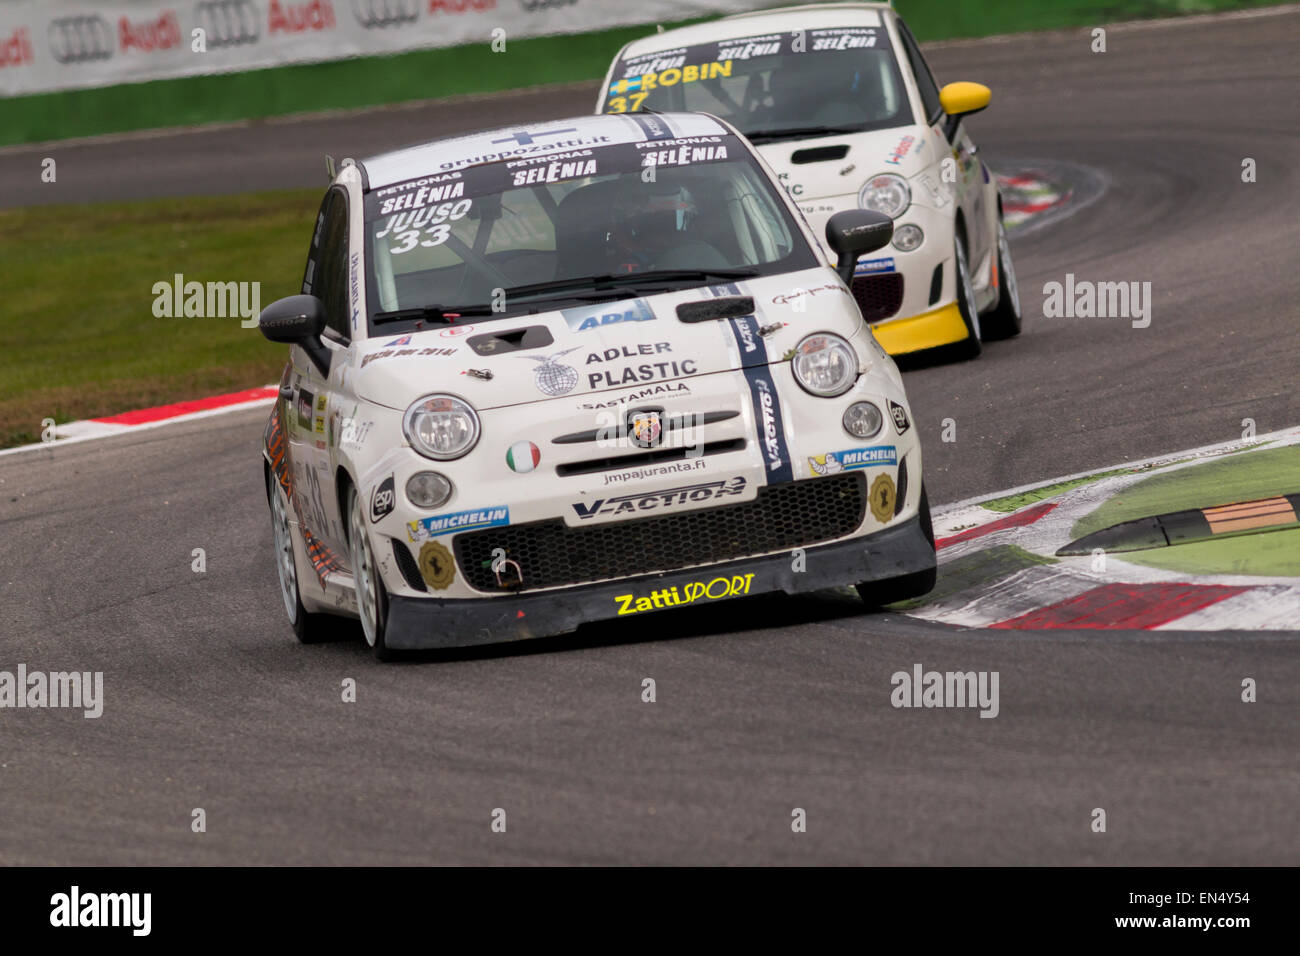 Monza, Italy - October 25, 2014: Fiat Abarth 695 of  V-Action Team, driven by Pajuranta Jusso Stock Photo